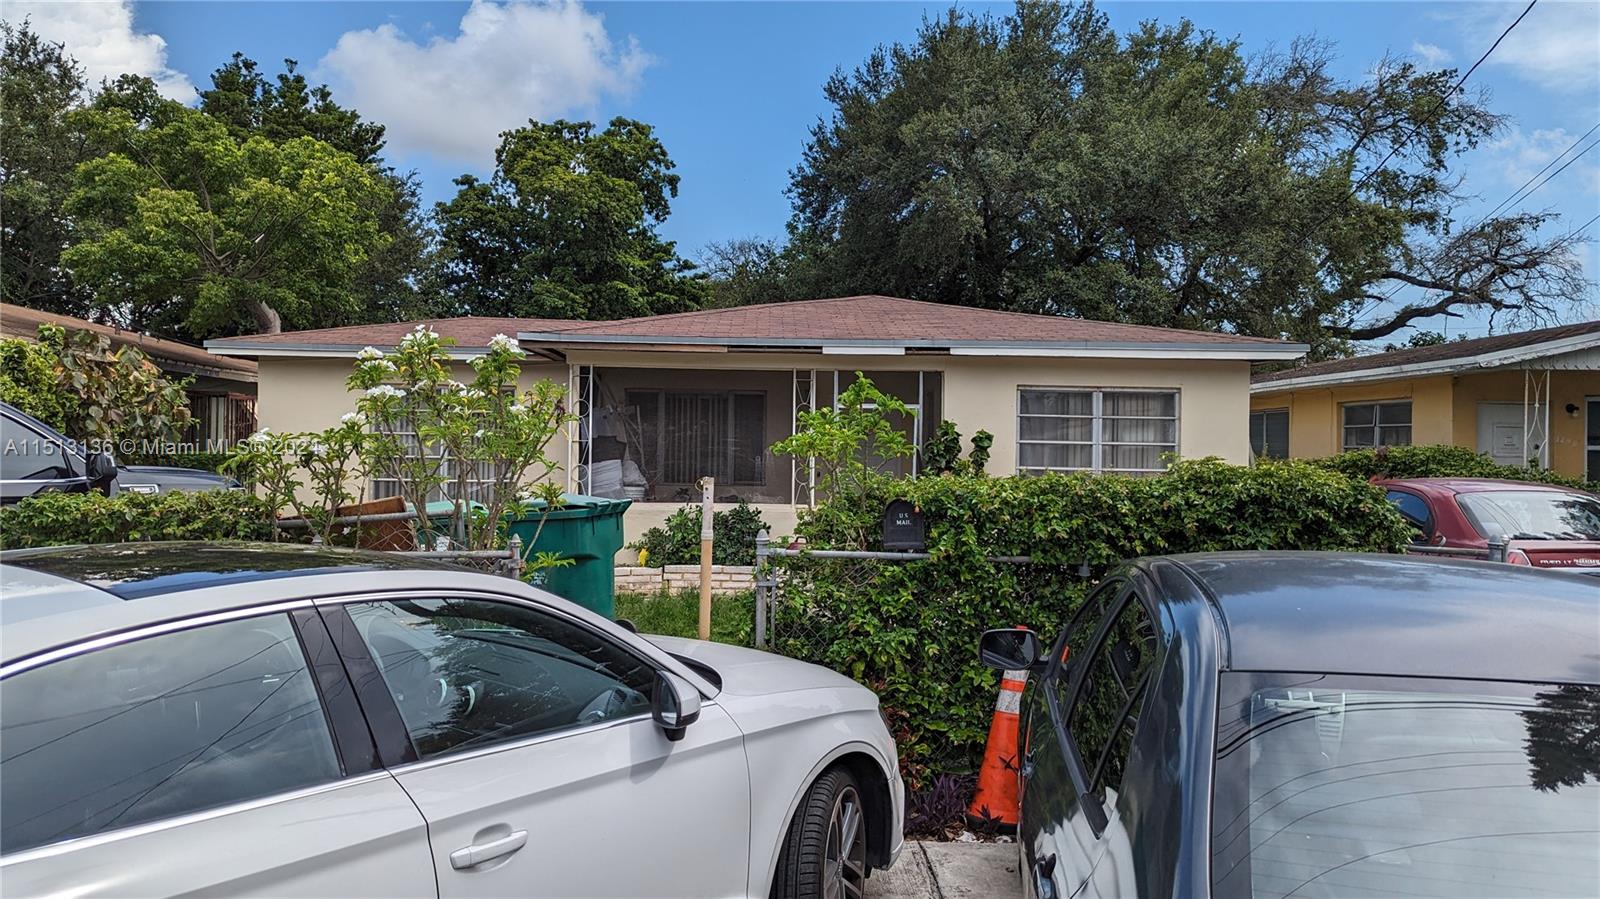 Property for Sale at Address Not Disclosed, Miami, Broward County, Florida - Bedrooms: 7 
Bathrooms: 3  - $675,000